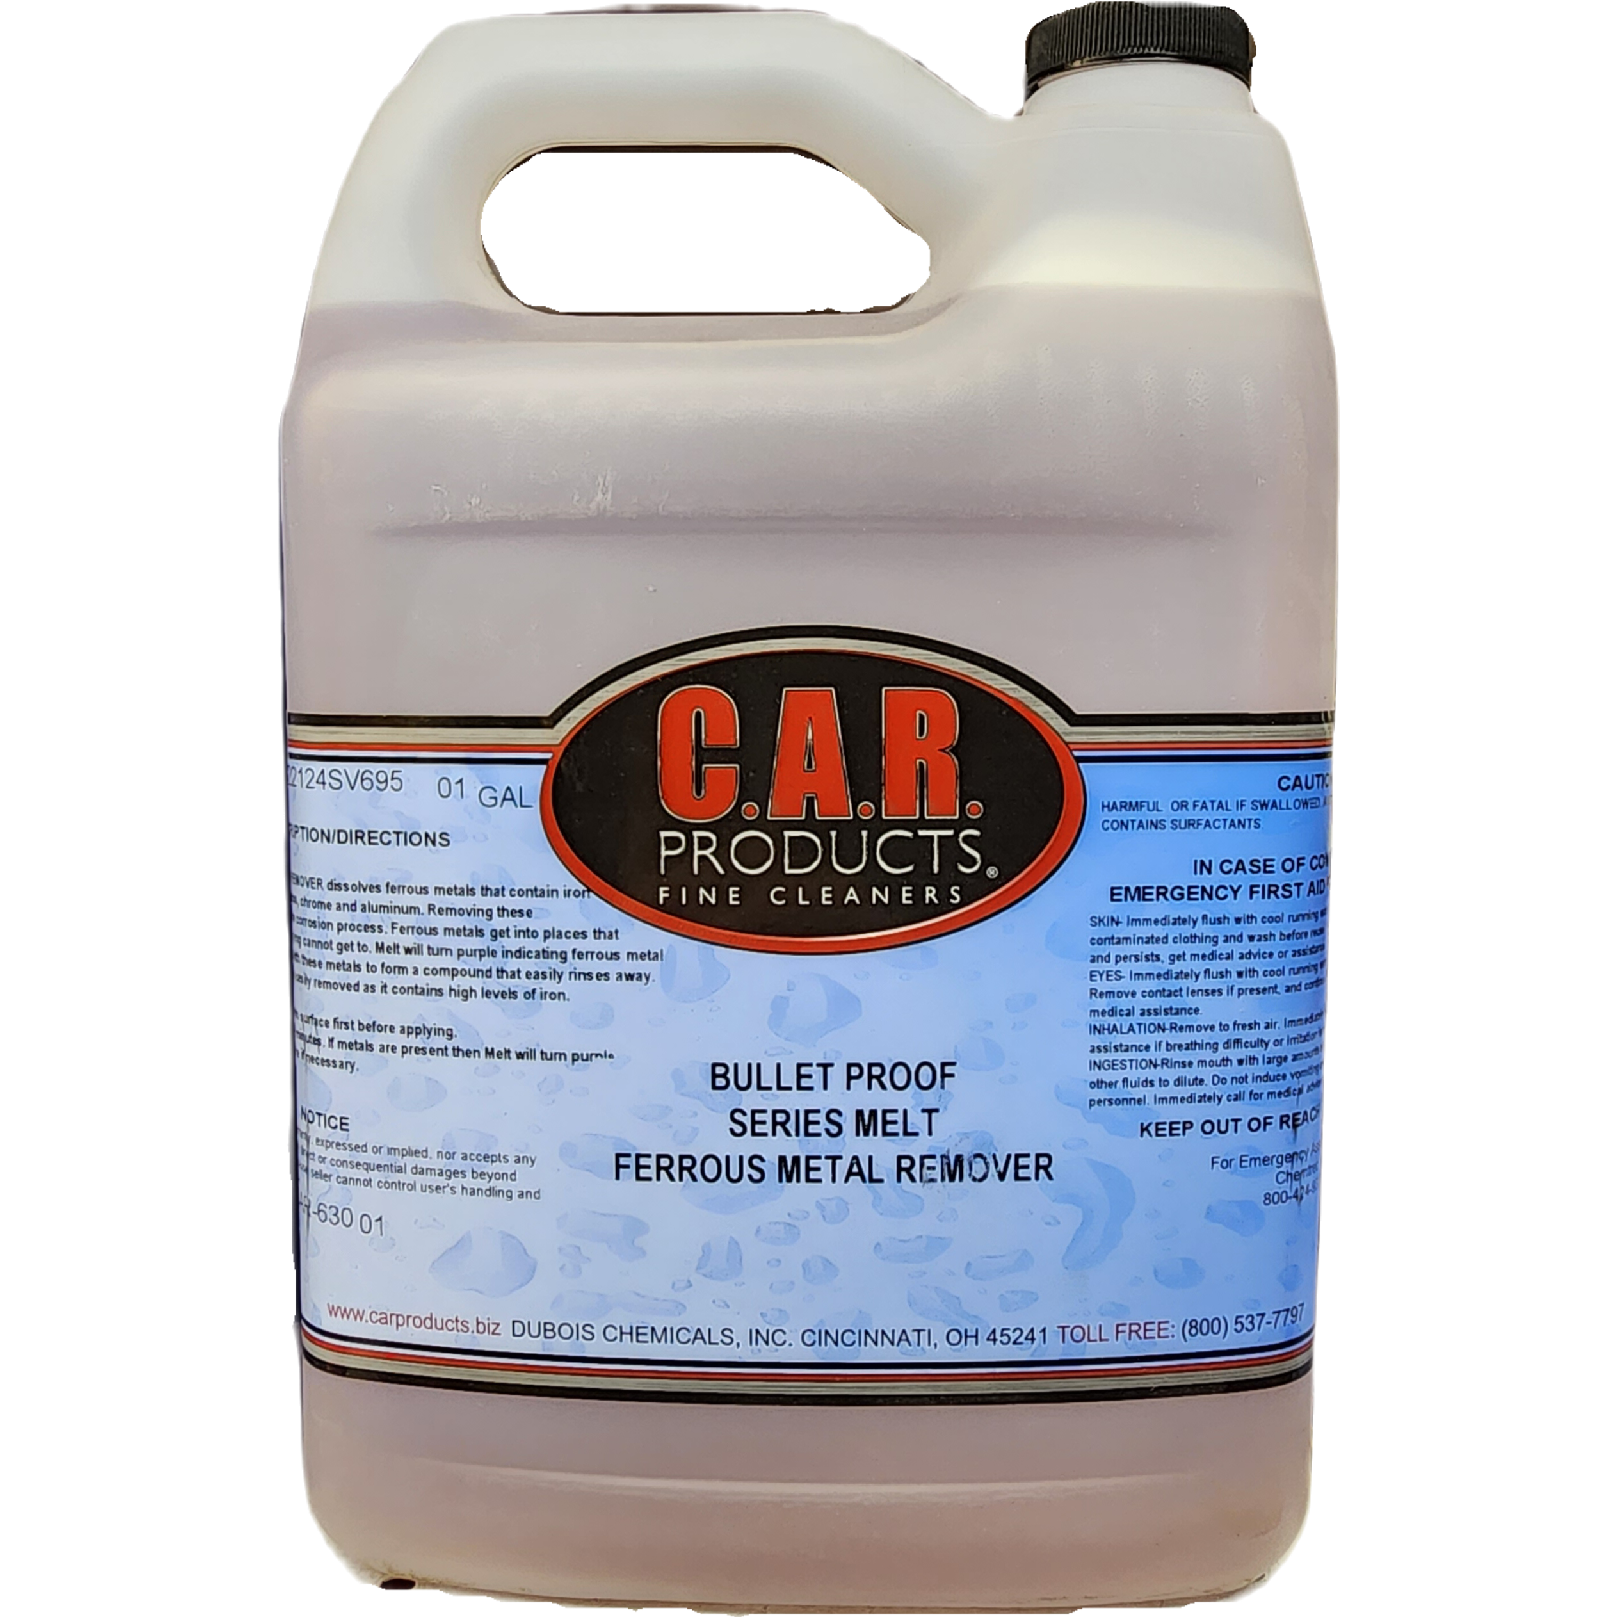 XCP CAR-63001 CAR Products Bullet Proof Series Melt Ferrous Metal Remover (1 gal)